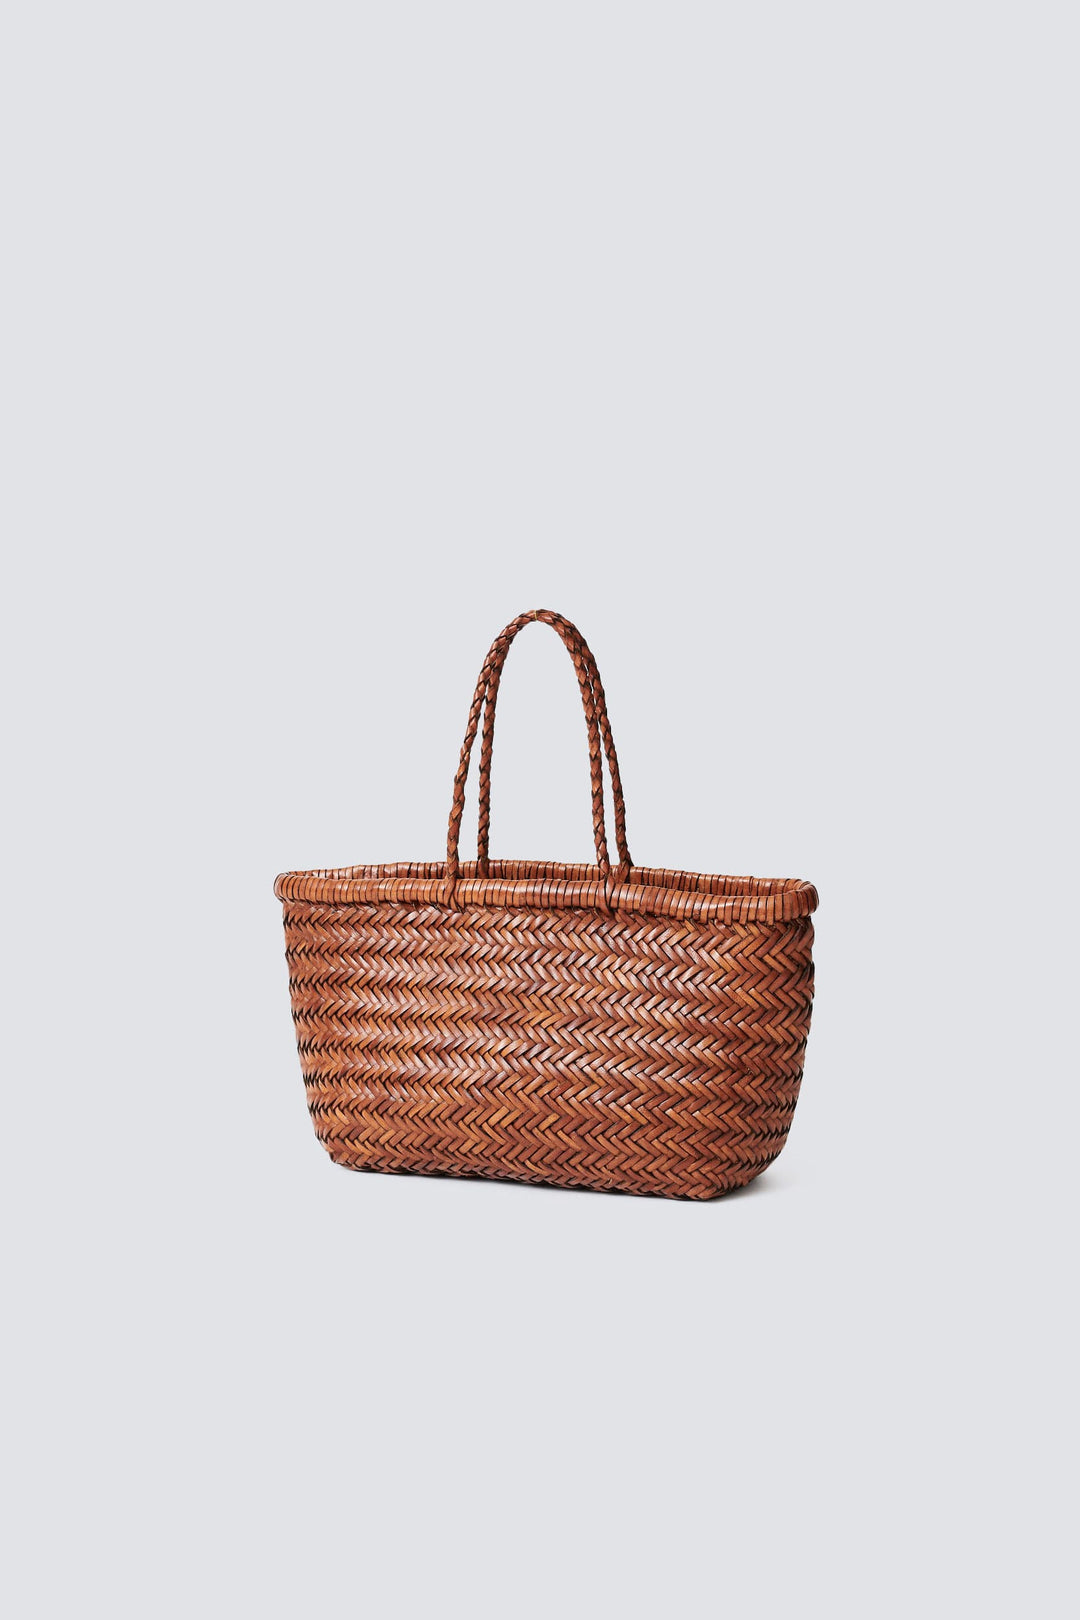 Beige Triple Jump small woven-leather basket bag, Dragon Diffusion